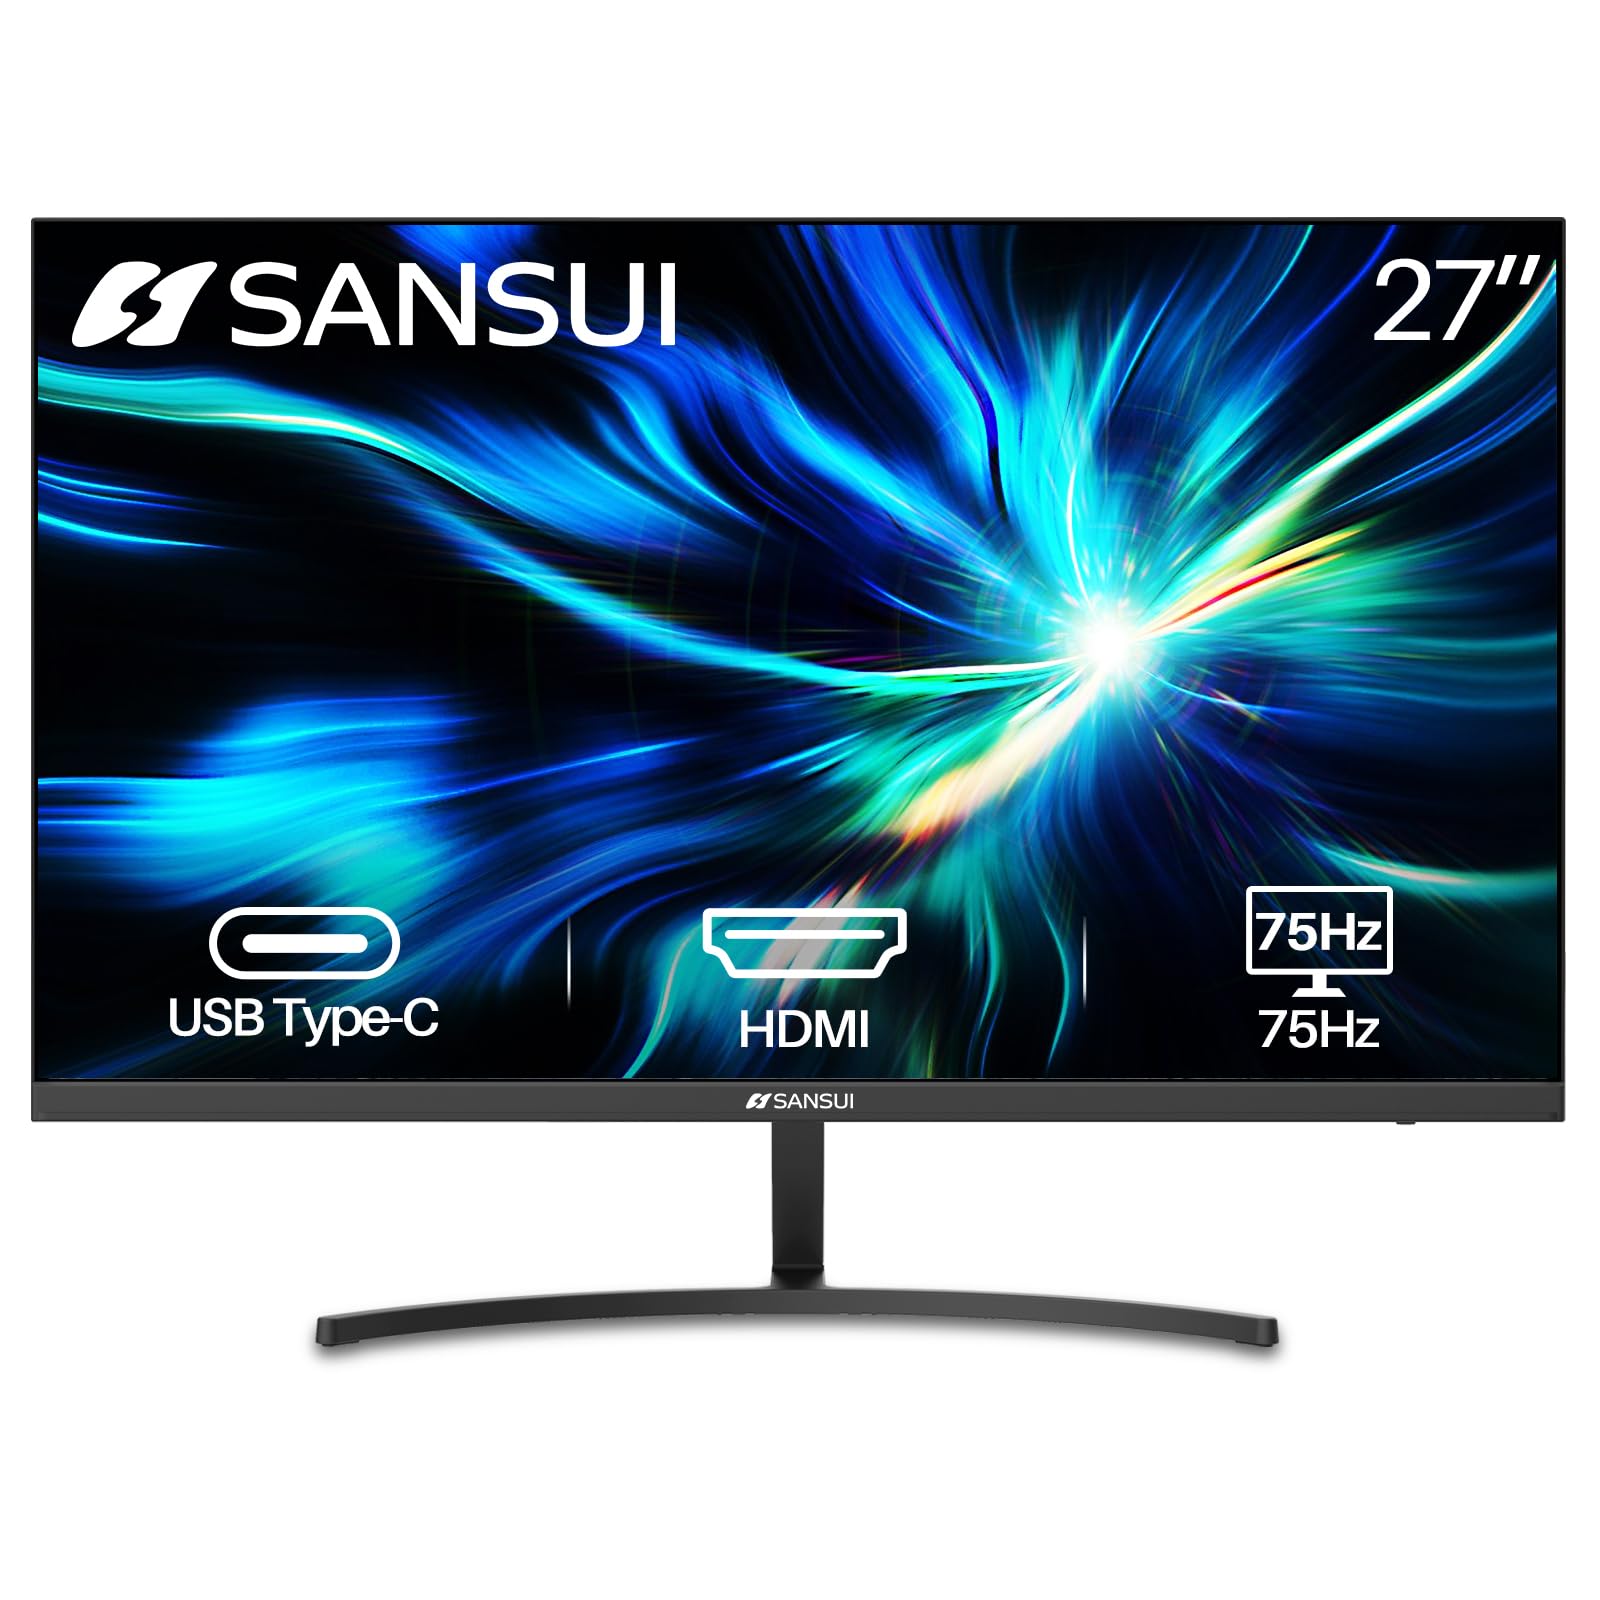 SANSUI Monitor 22 inch 1080p FHD 75Hz Computer Monitor with HDMI VGA,  Ultra-Slim Bezel Ergonomic Tilt Eye Care LED Display for Home Office  (ES-22F1